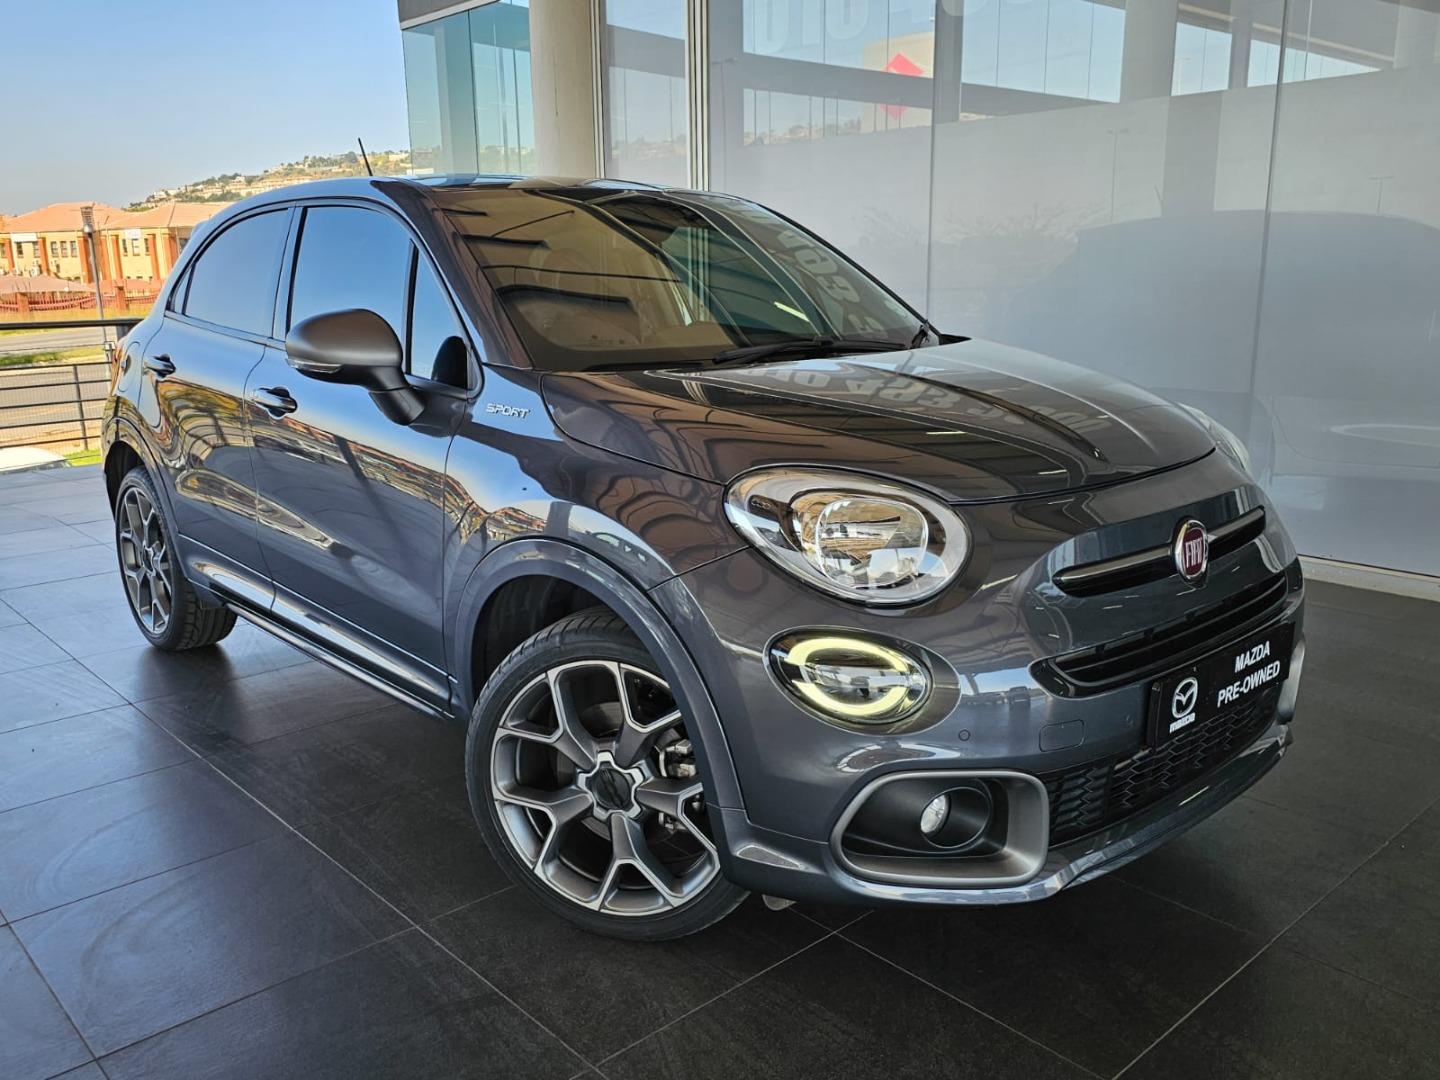 2022 Fiat 500X  for sale - UC4469